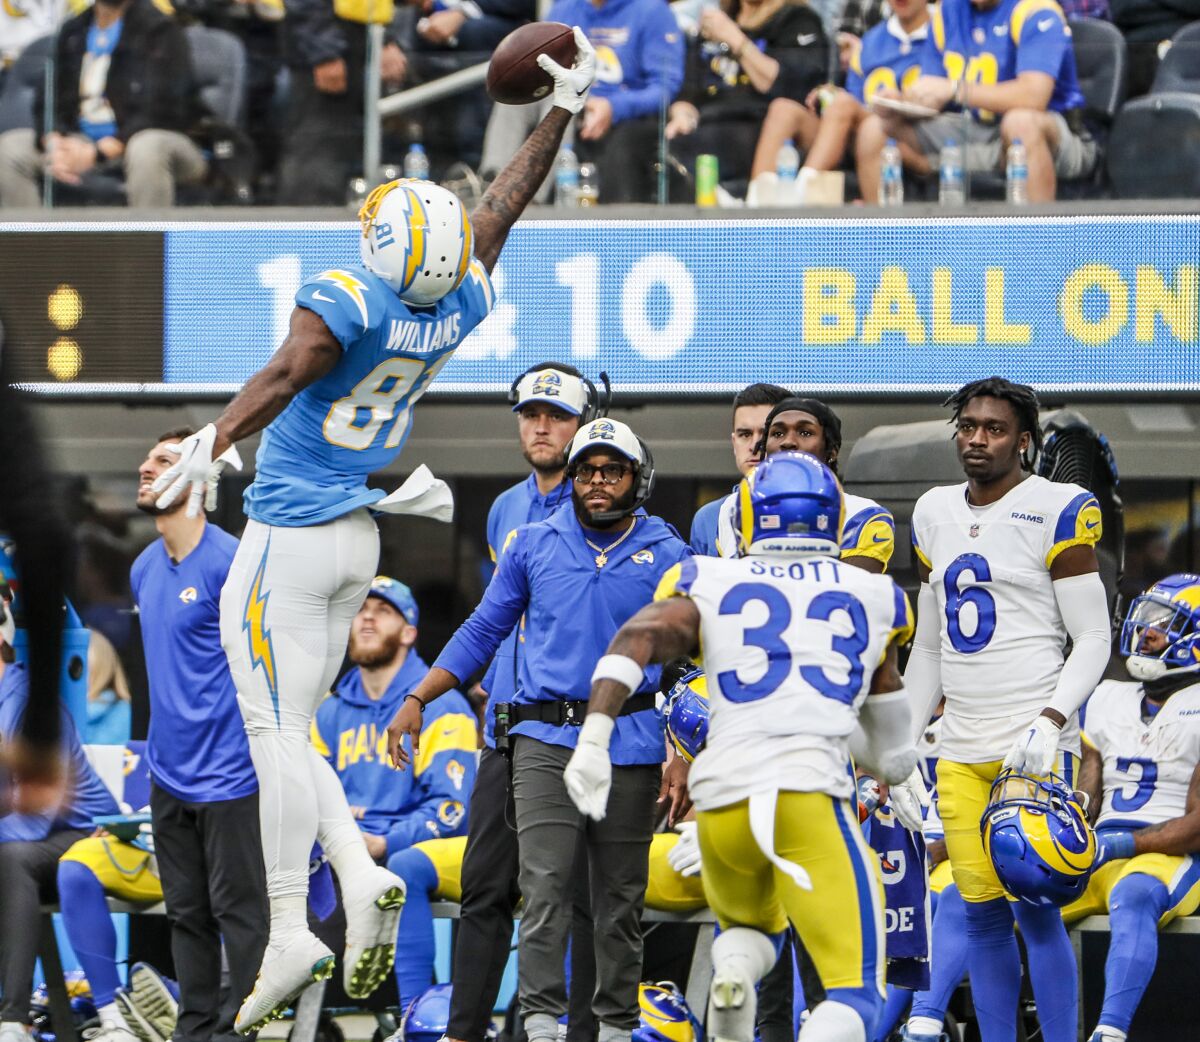  chargers wide receiver mike williams (81) made a one-handed catch in front of rams safety nick scott (33).